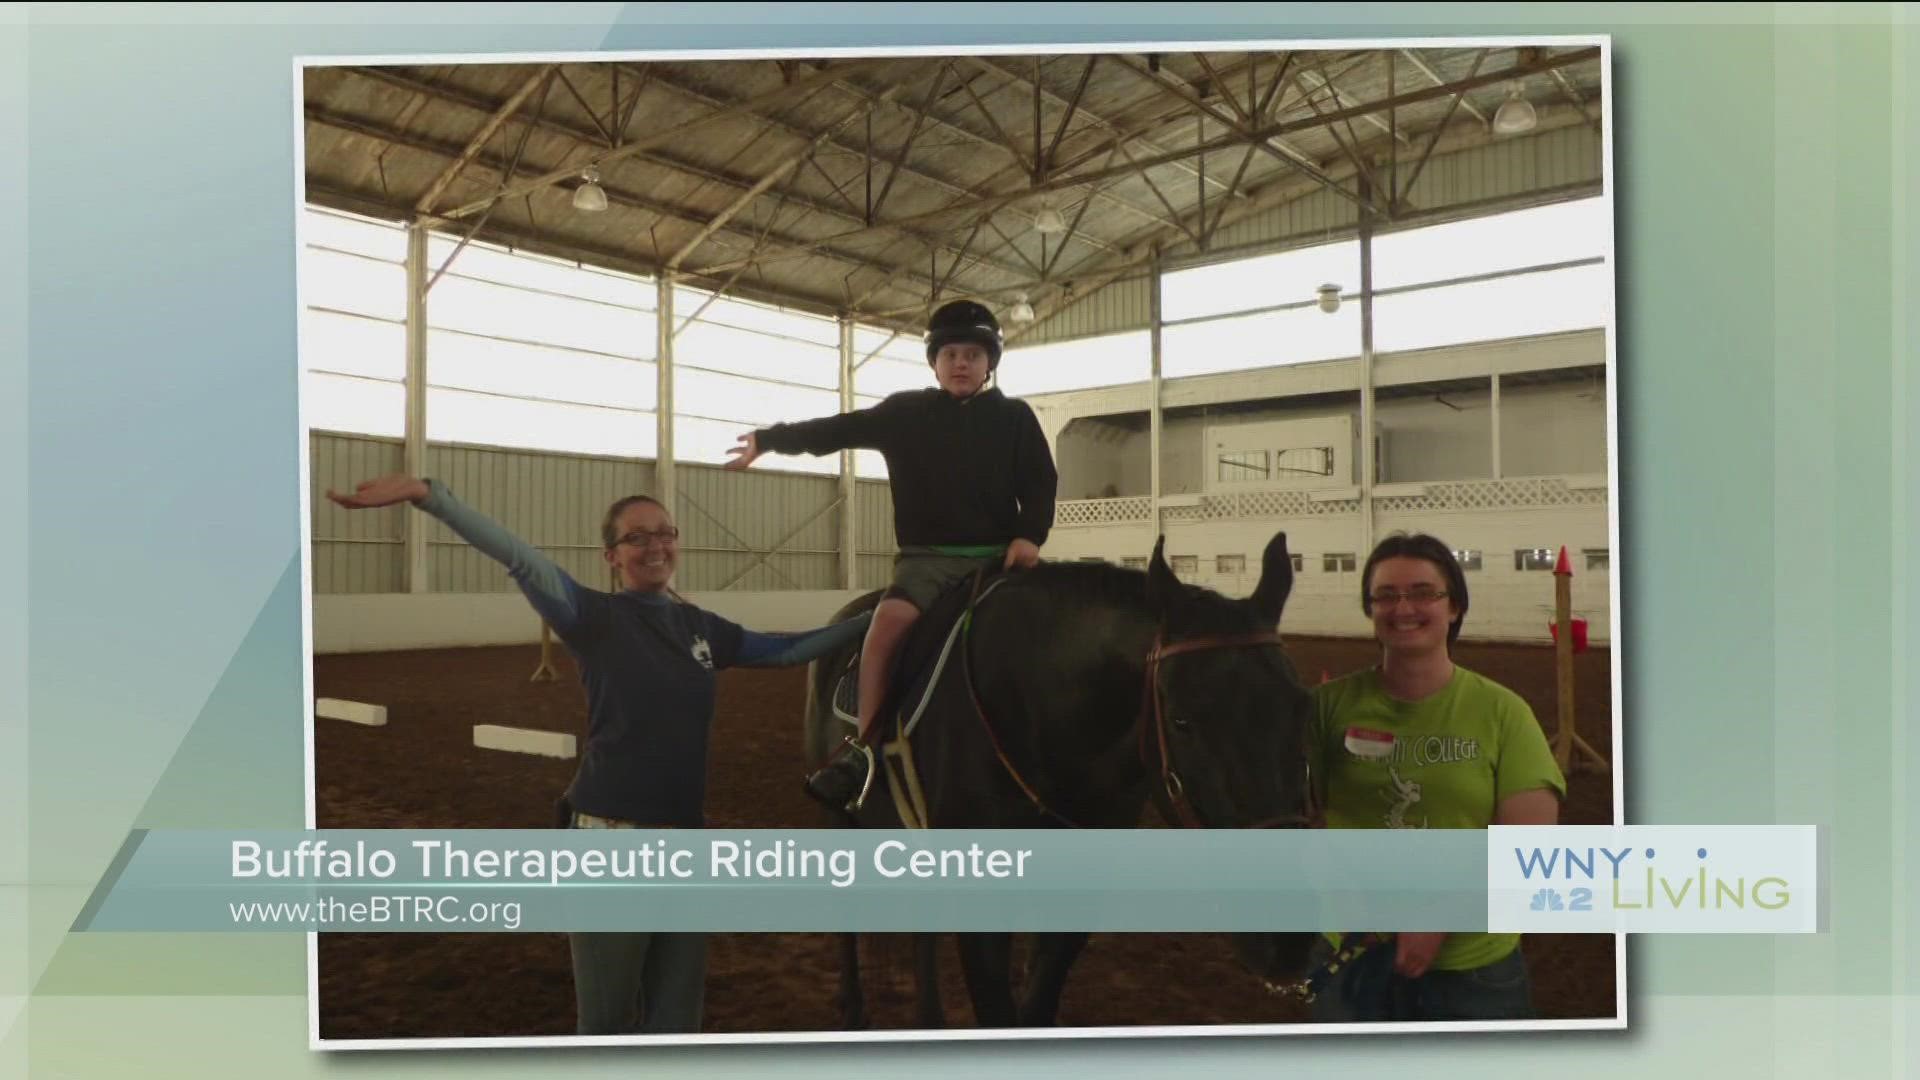 WNY Living - September 17 - Buffalo Therapeutic Riding Center (THIS VIDEO IS SPONSORED BY BUFFALO THERAPEUTIC RIDING CENTER)